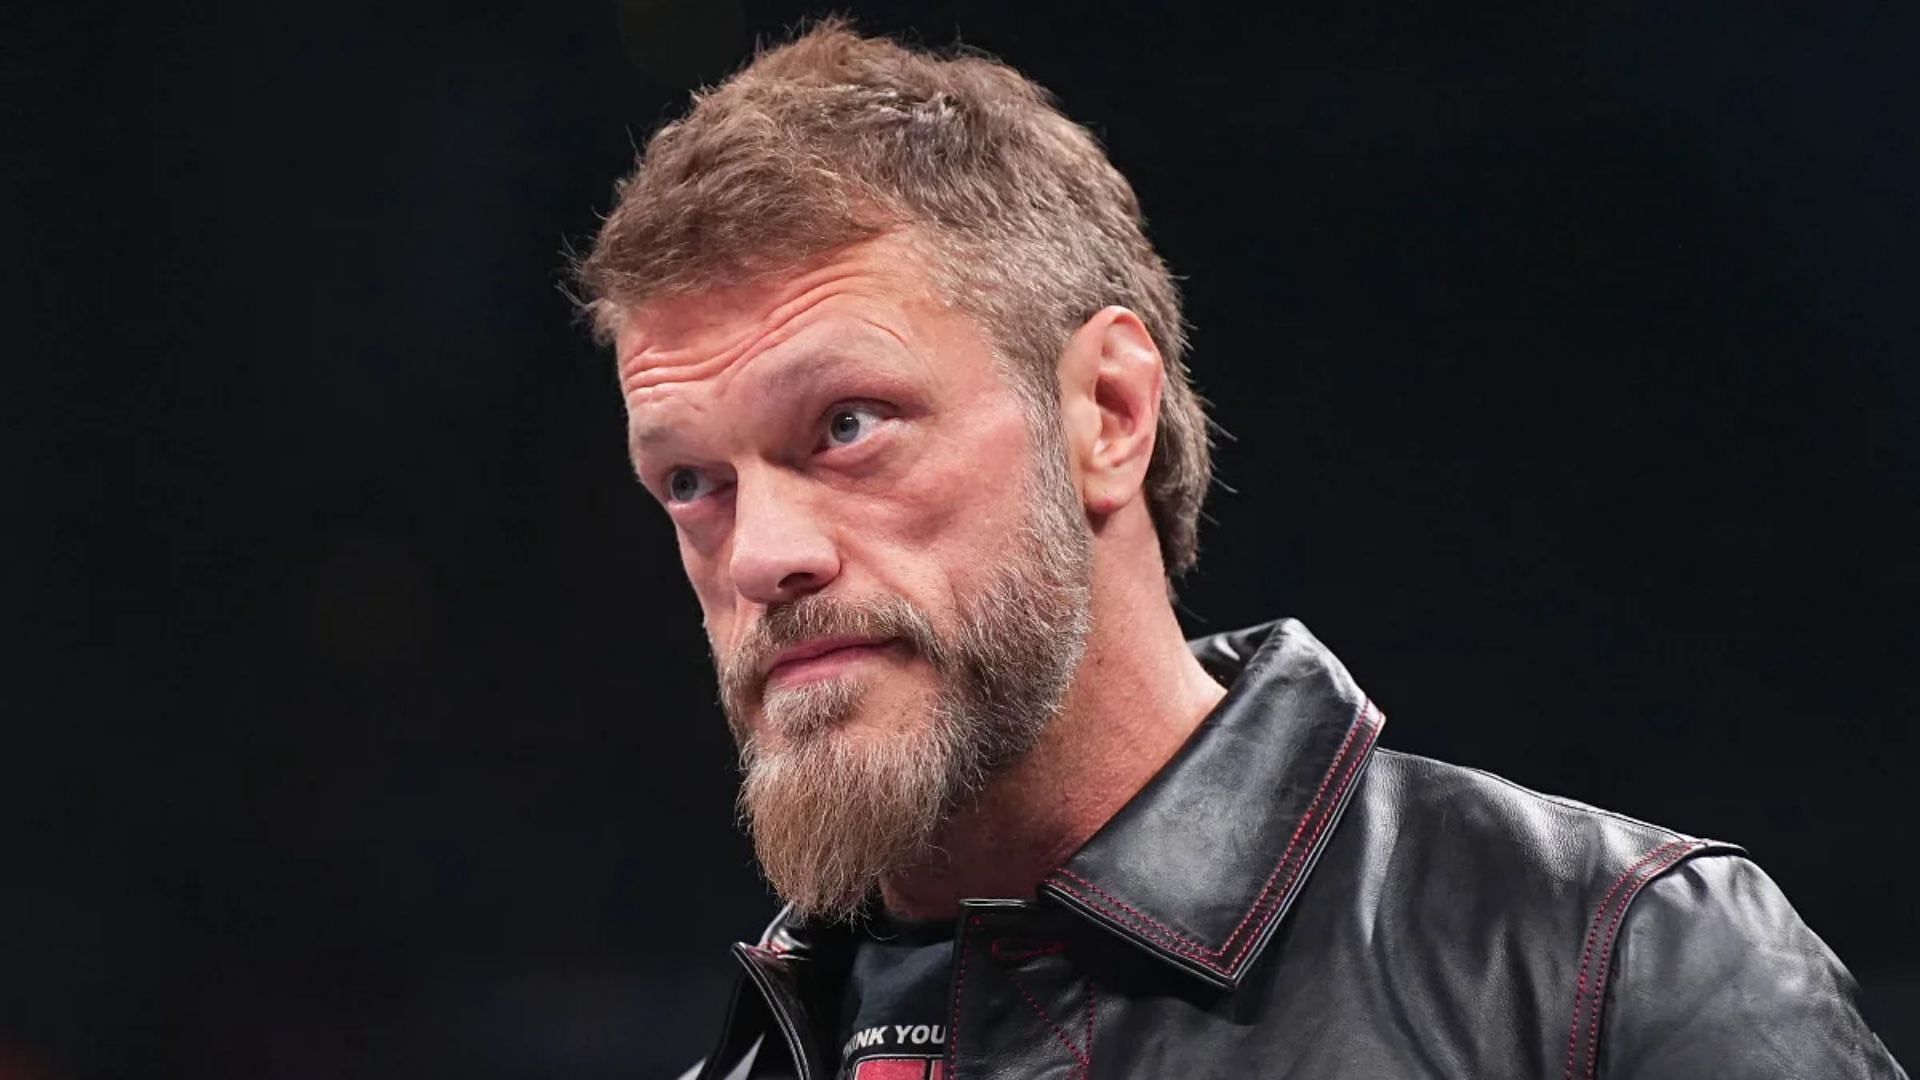 Edge is a former WWE Champion currently signed to AEW